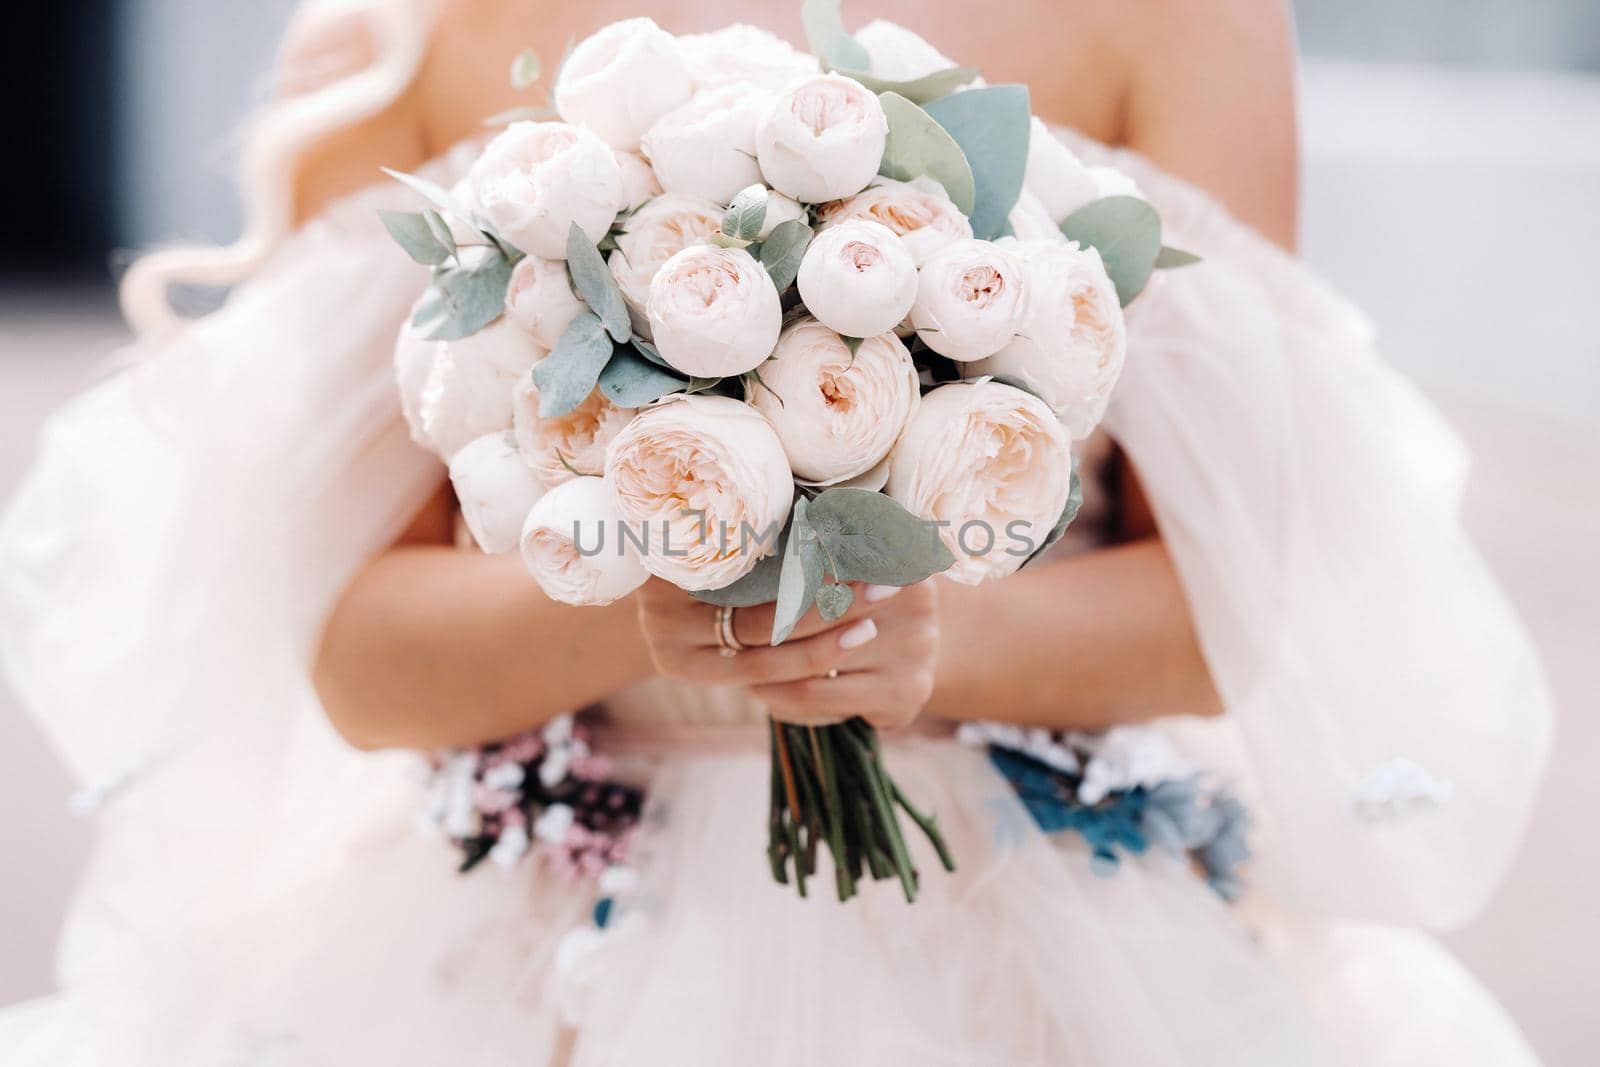 A bride in a wedding dress holds a bouquet of roses in her hands in front of her .close up.